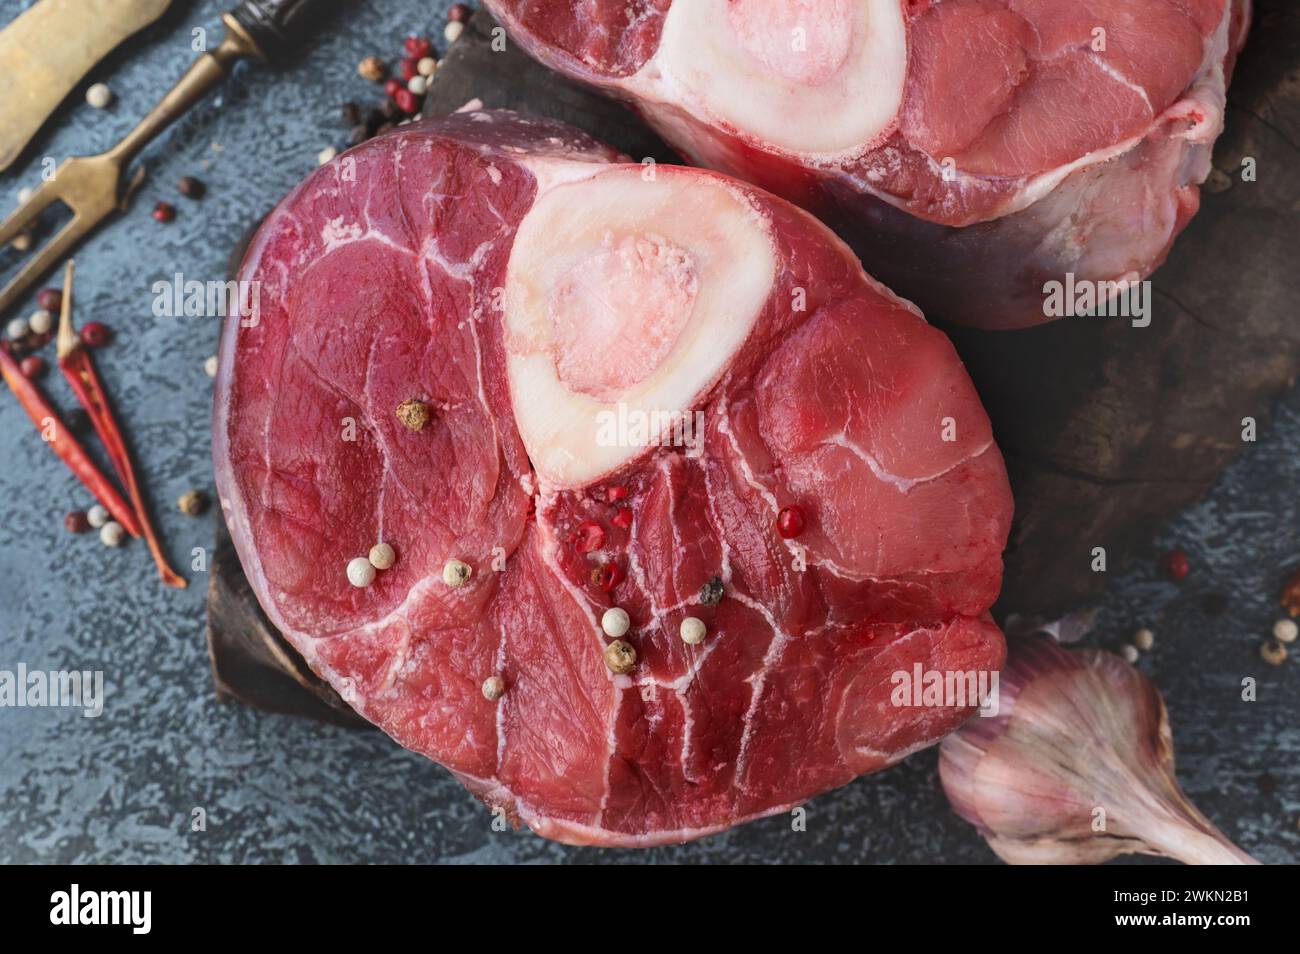 ossobuco. Raw beef ossobuco steak, Italian ossobuco with cooking spices. Black background. Top view. Close-up Stock Photo